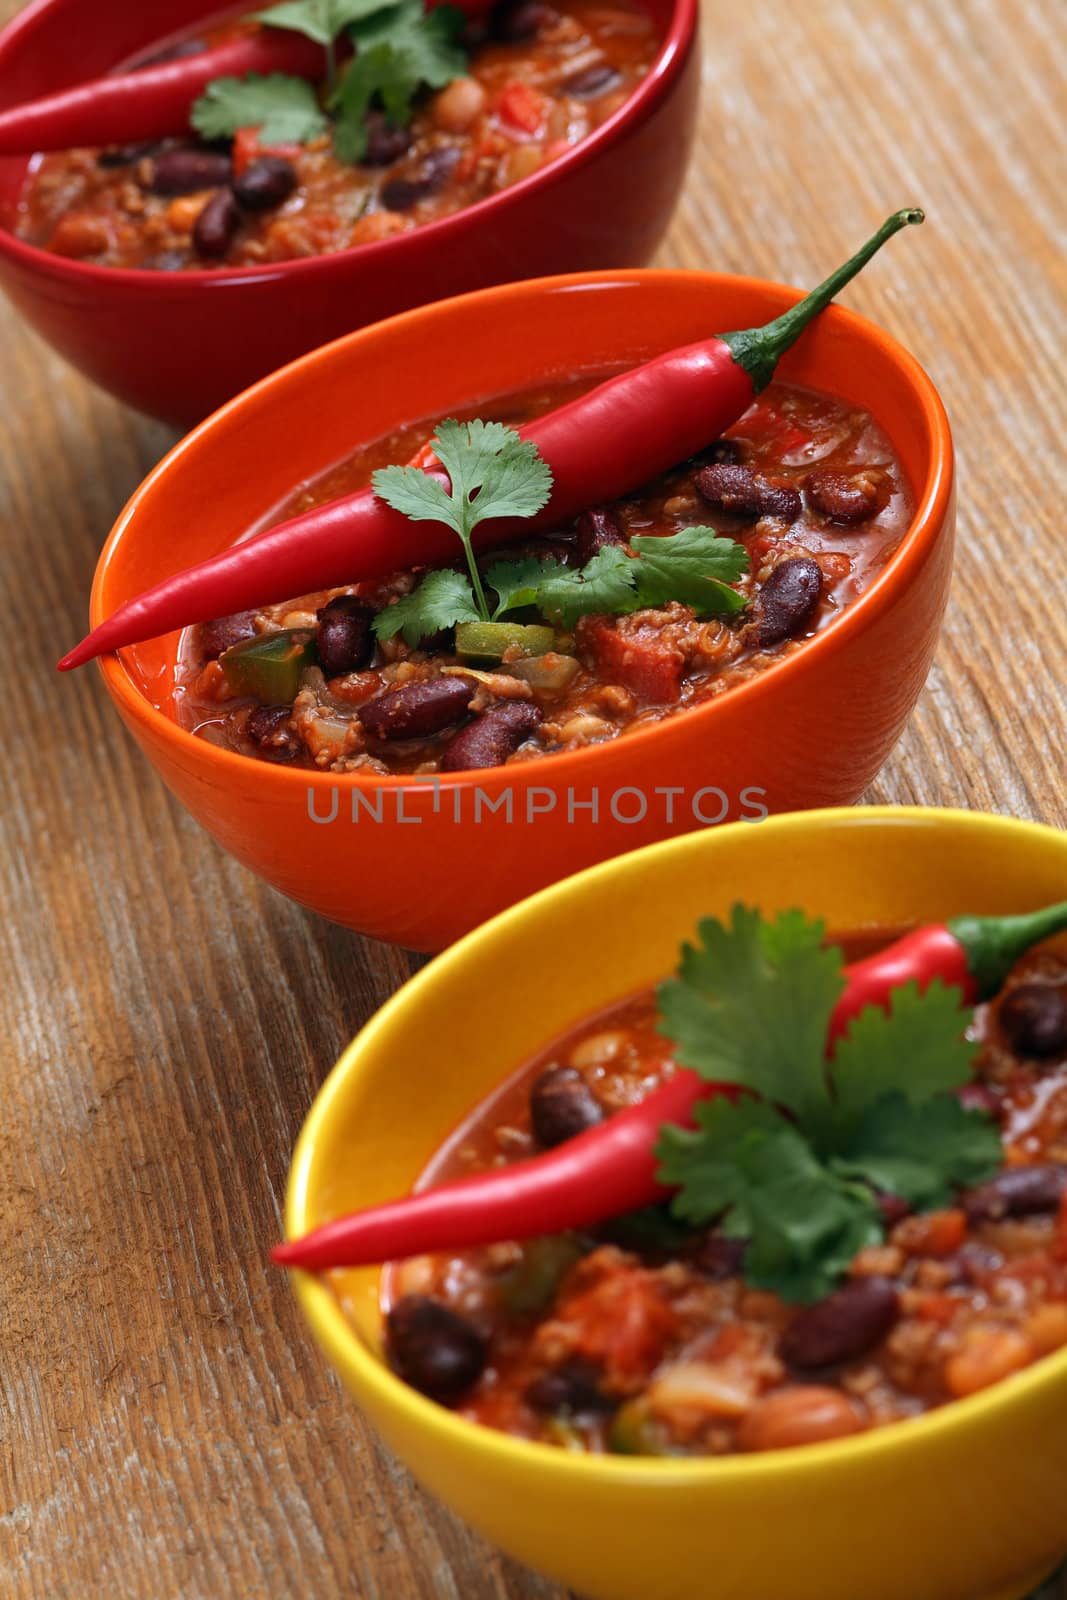 Bowls of chili by sumners